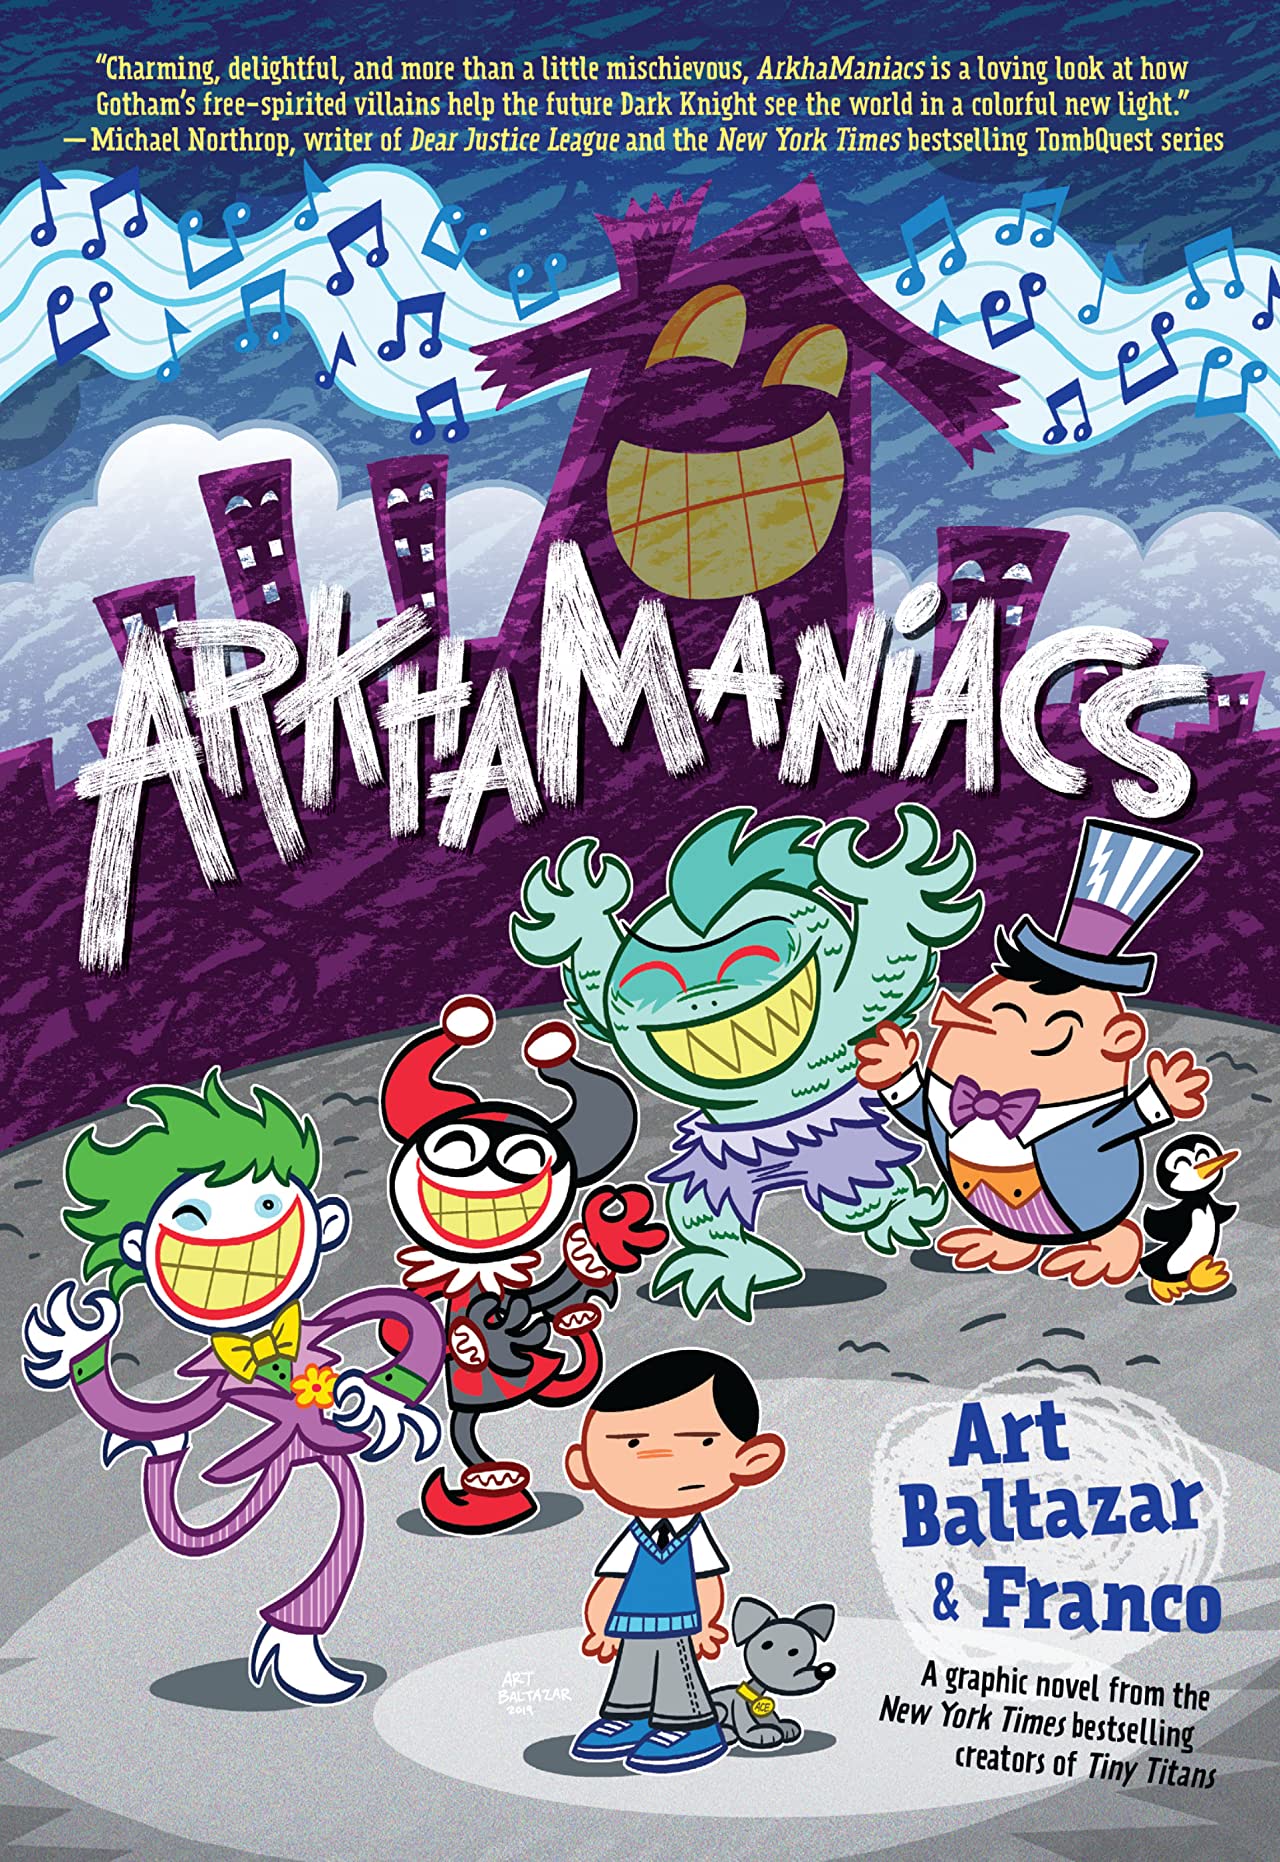 Review: ArkhaManiacs